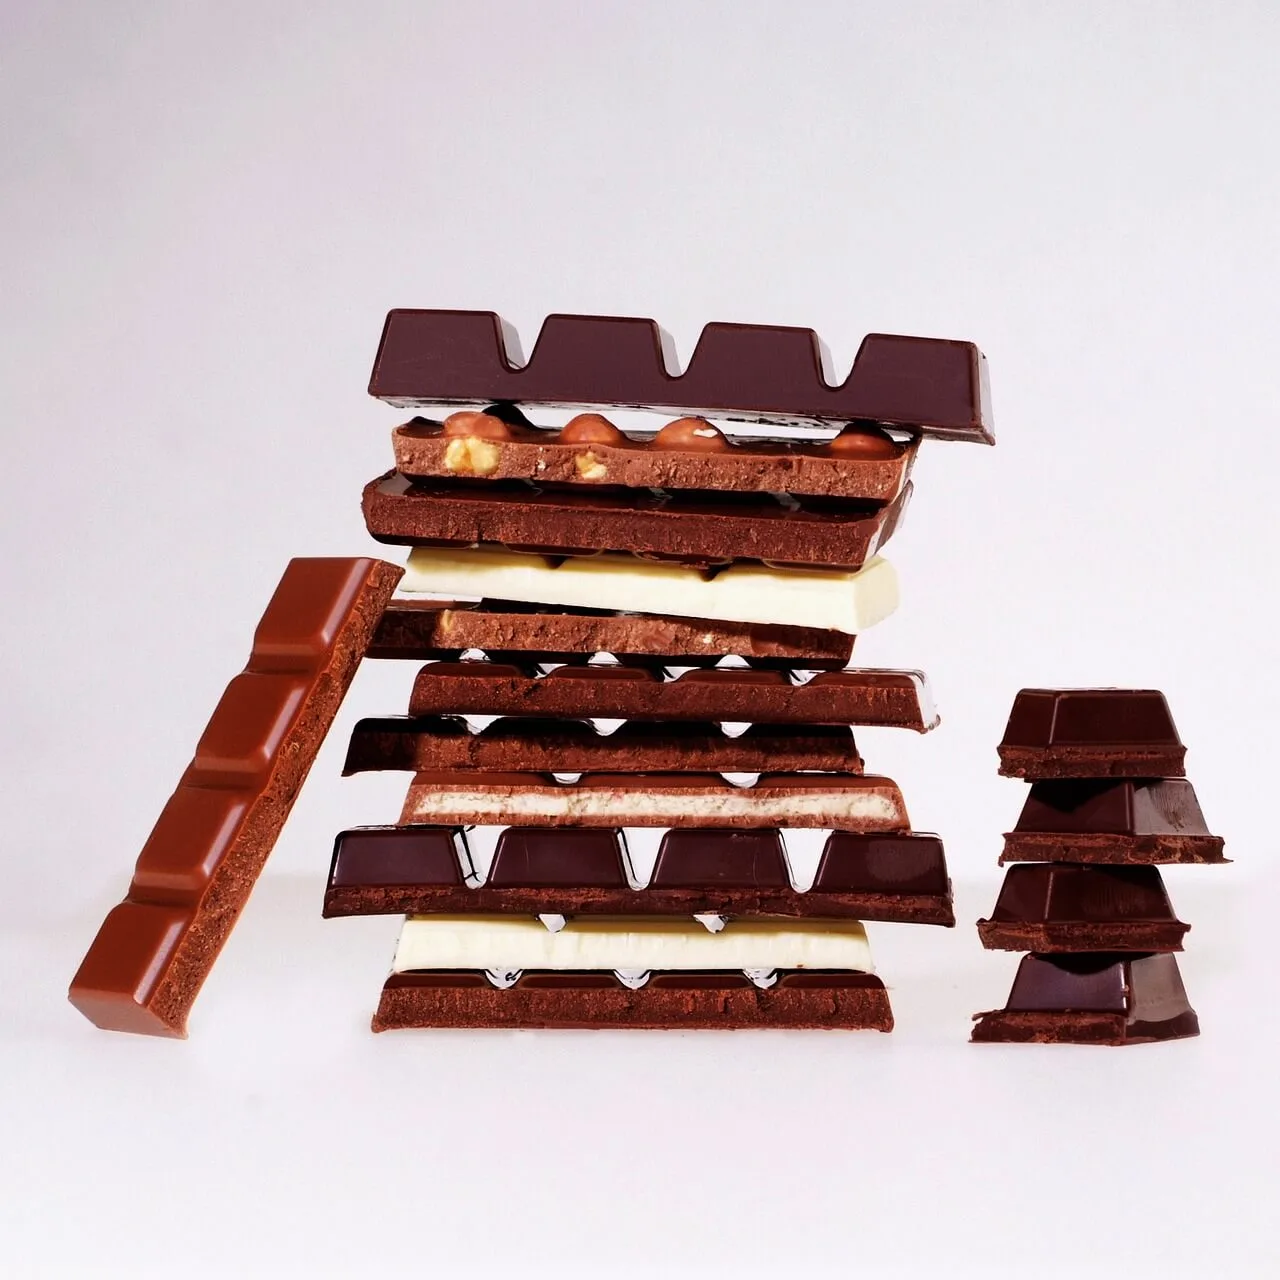 Explore the compatibility of Dark Chocolate with a Low FODMAP diet, offering insights for those managing IBS and digestive health